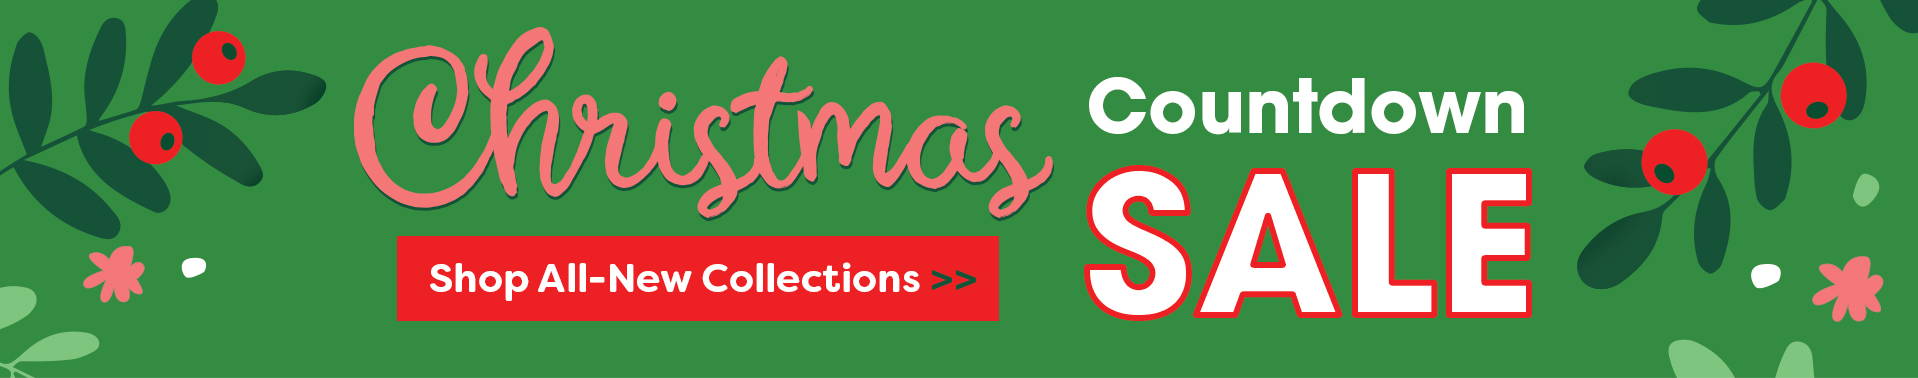 Shop All-New Collections in the Christmas Countdown Sale. Image: stylized text and holly.